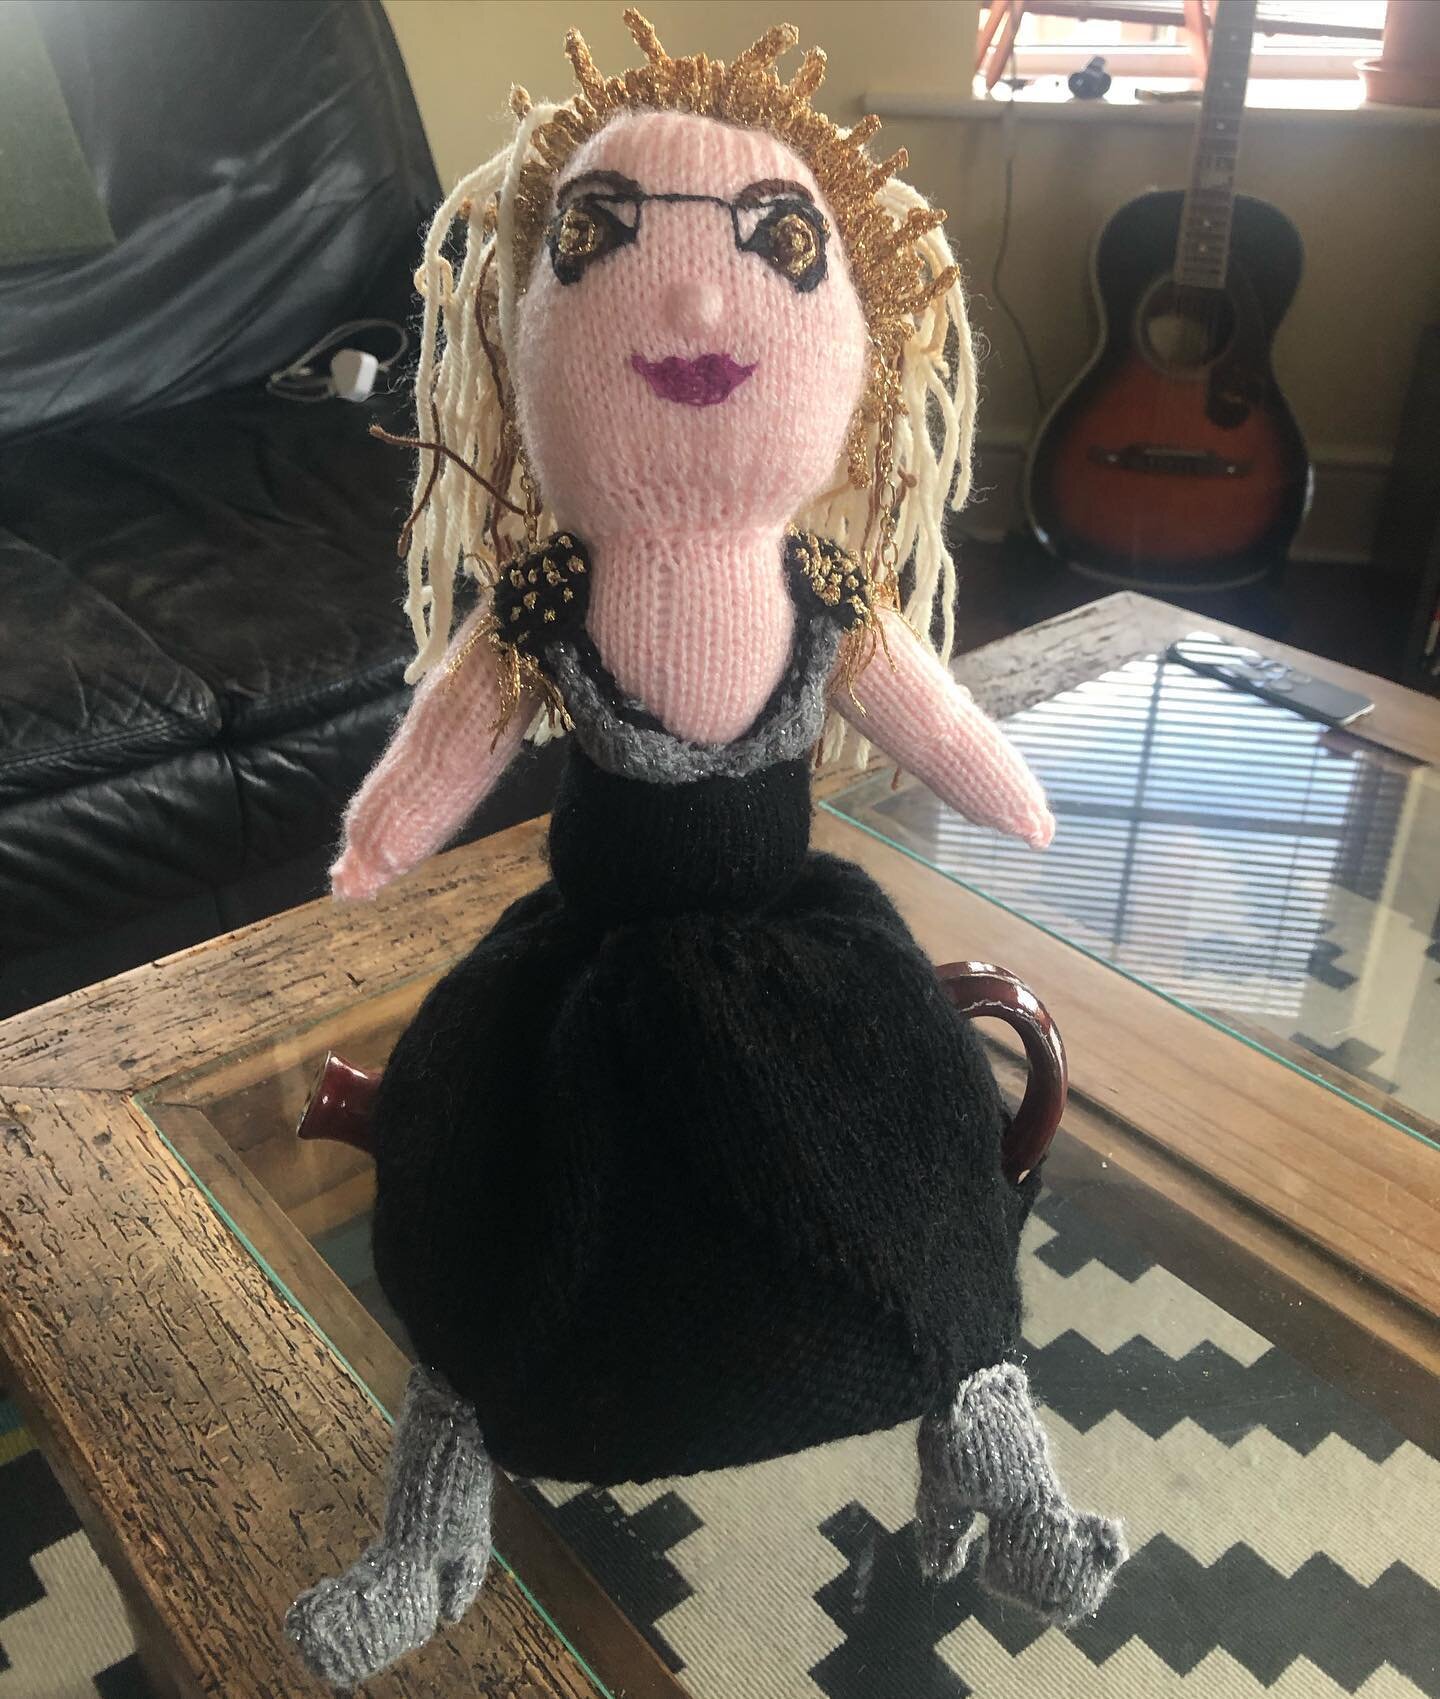 Today I received the best present ever from my big sister @tracekelliher . It&rsquo;s a tea cosy. Of me. It&rsquo;s a me cosy! The level of detail is incredible, right down to the eye make up and chain link earrings. It&rsquo;s just amazing! 

It&rsq